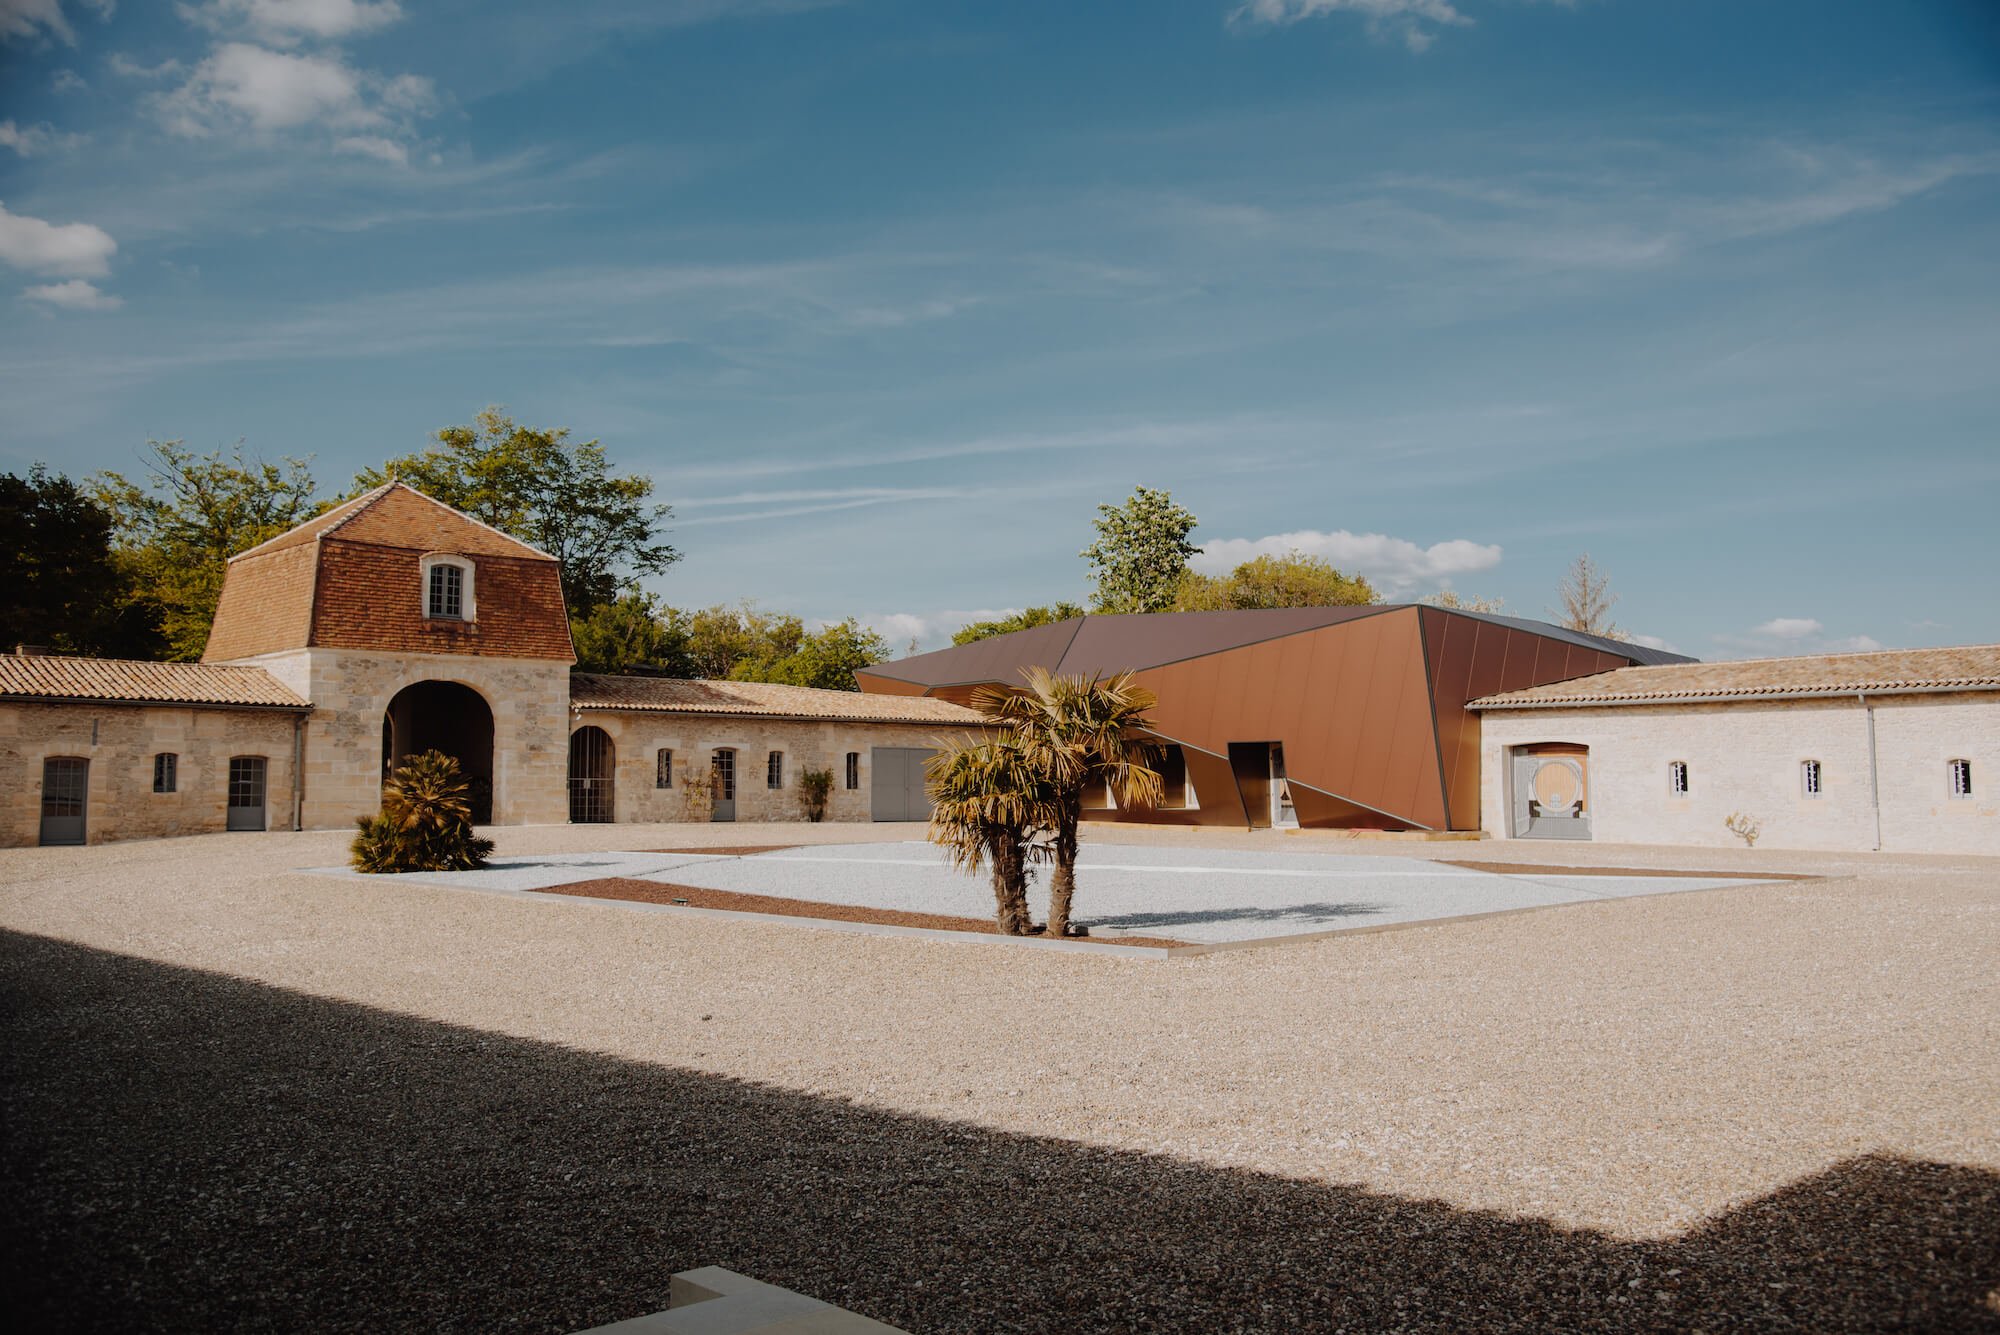 Exceptional winegrowing estate in the heart of a Gironde vineyard near Saint-Émilion